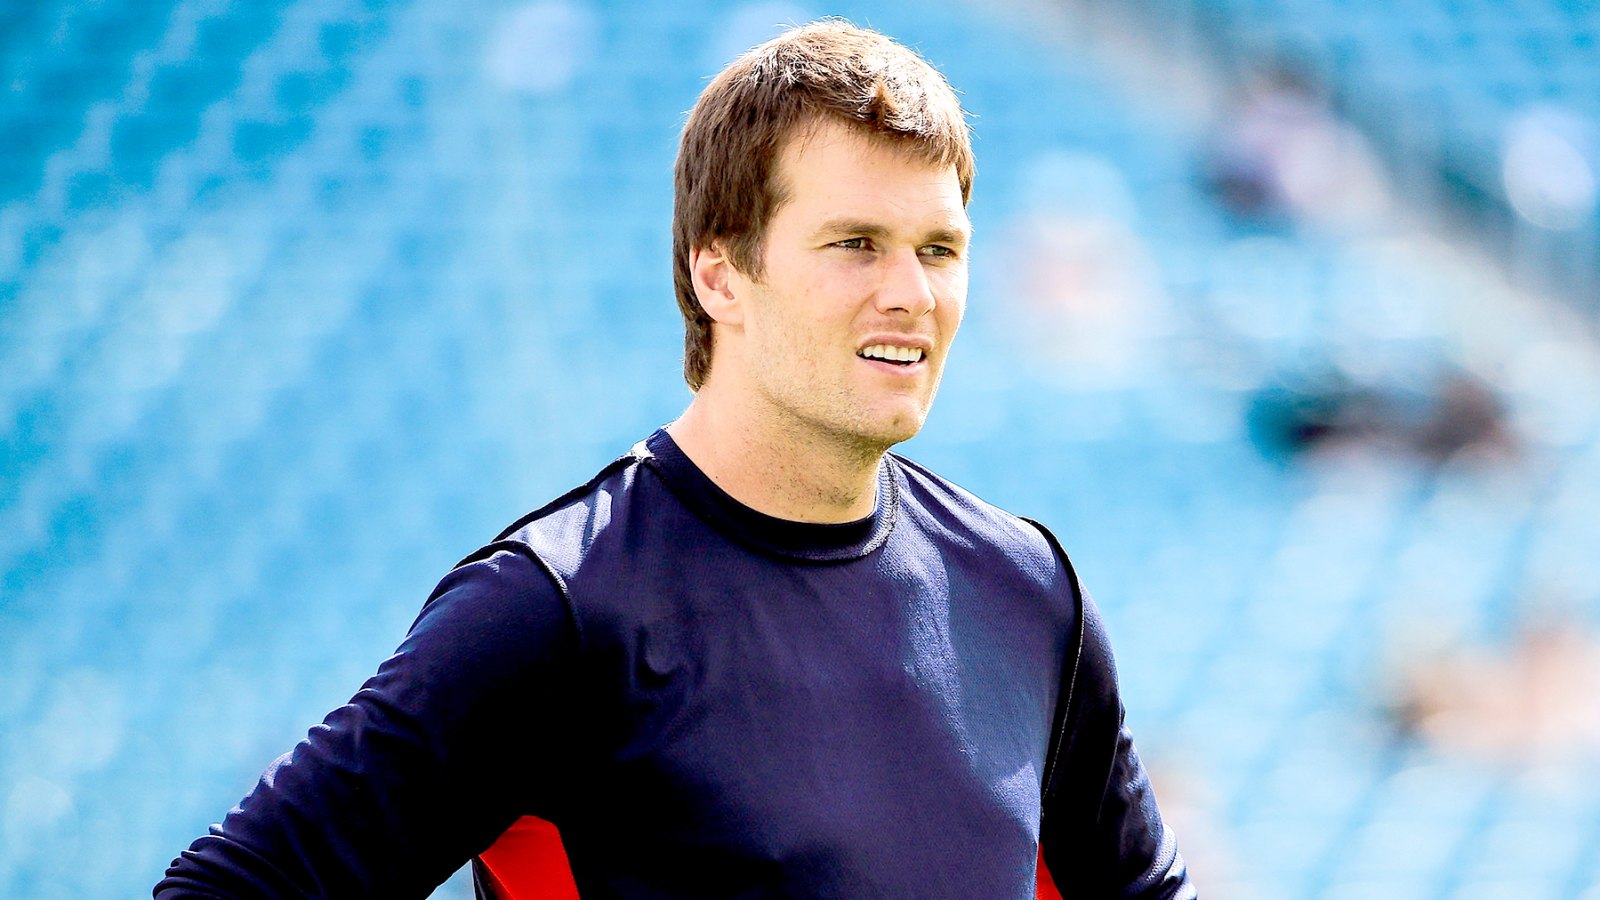 Tom Brady #12 of the New England Patriots warms up before the game against the Miami Dolphins at Sun Life Stadium on January 3, 2016 in Miami Gardens, Florida.